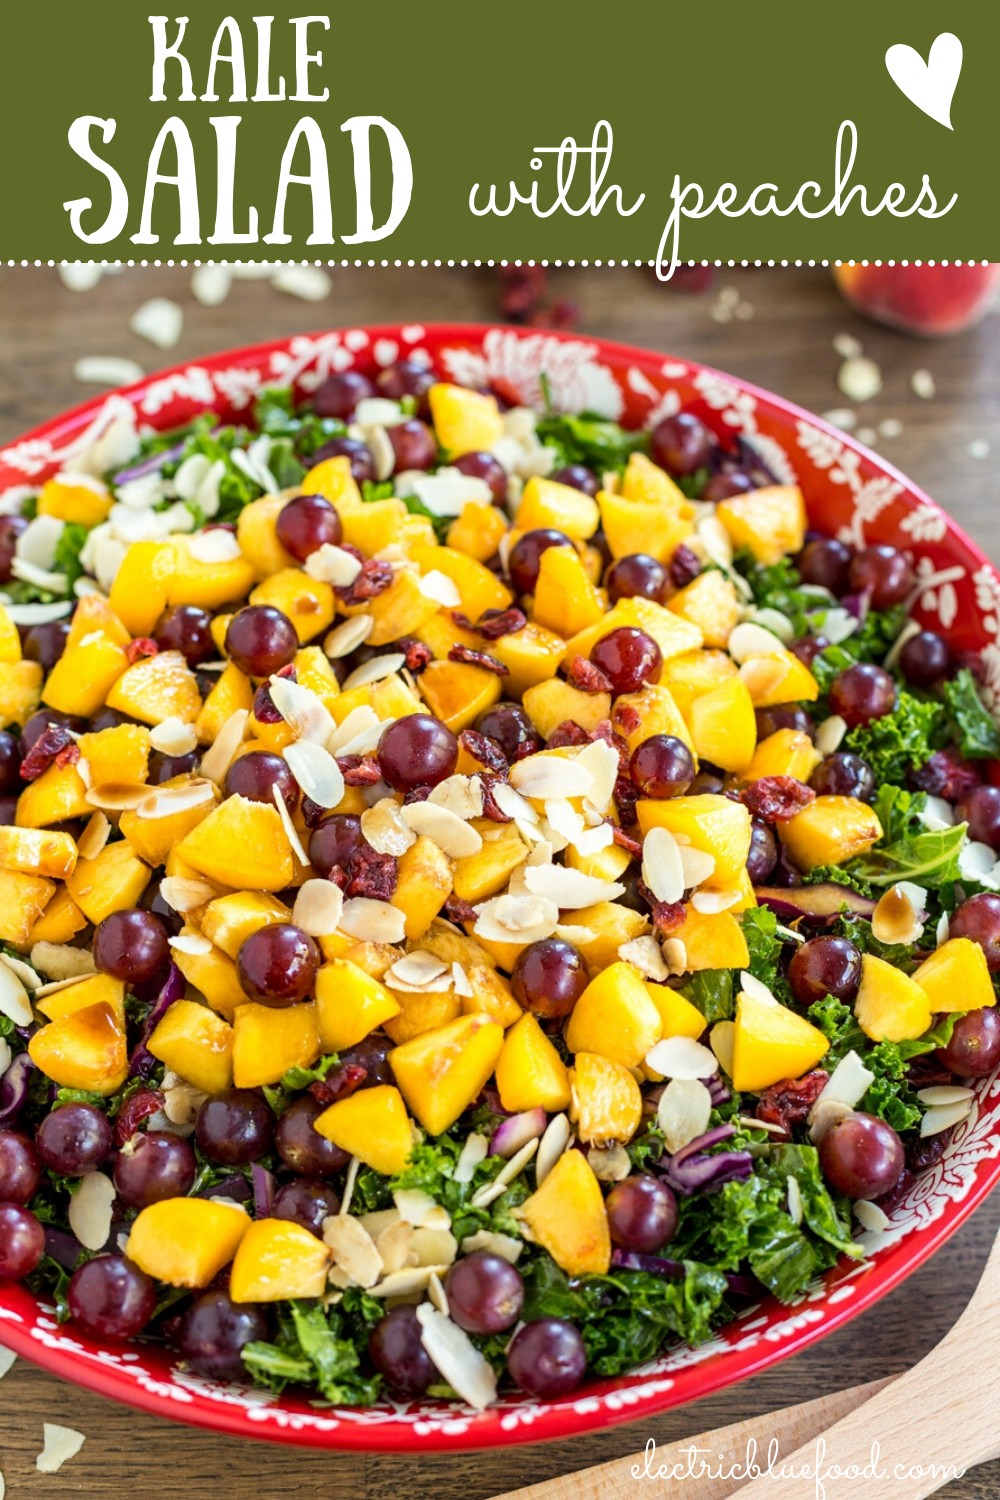 Fruity kale salad with peaches, grapes and almonds. With vegan balsamico dressing. A fresh and flavourful salad to enjoy in the summer.